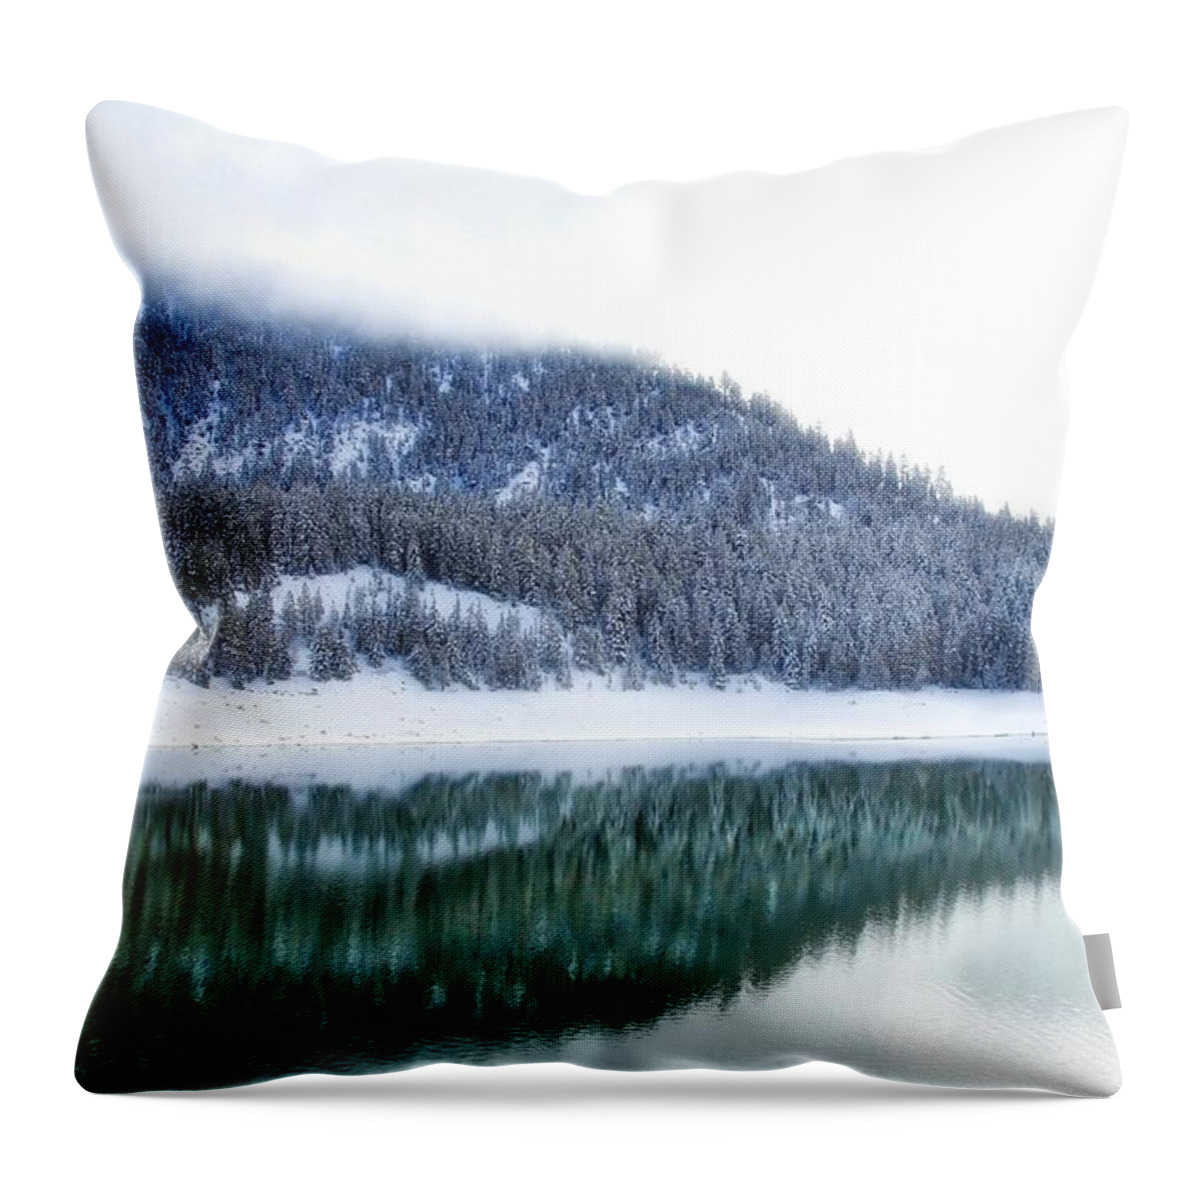 Snowy Trees On The Lake Throw Pillow featuring the photograph Snowy trees on the lake by Lynn Hopwood